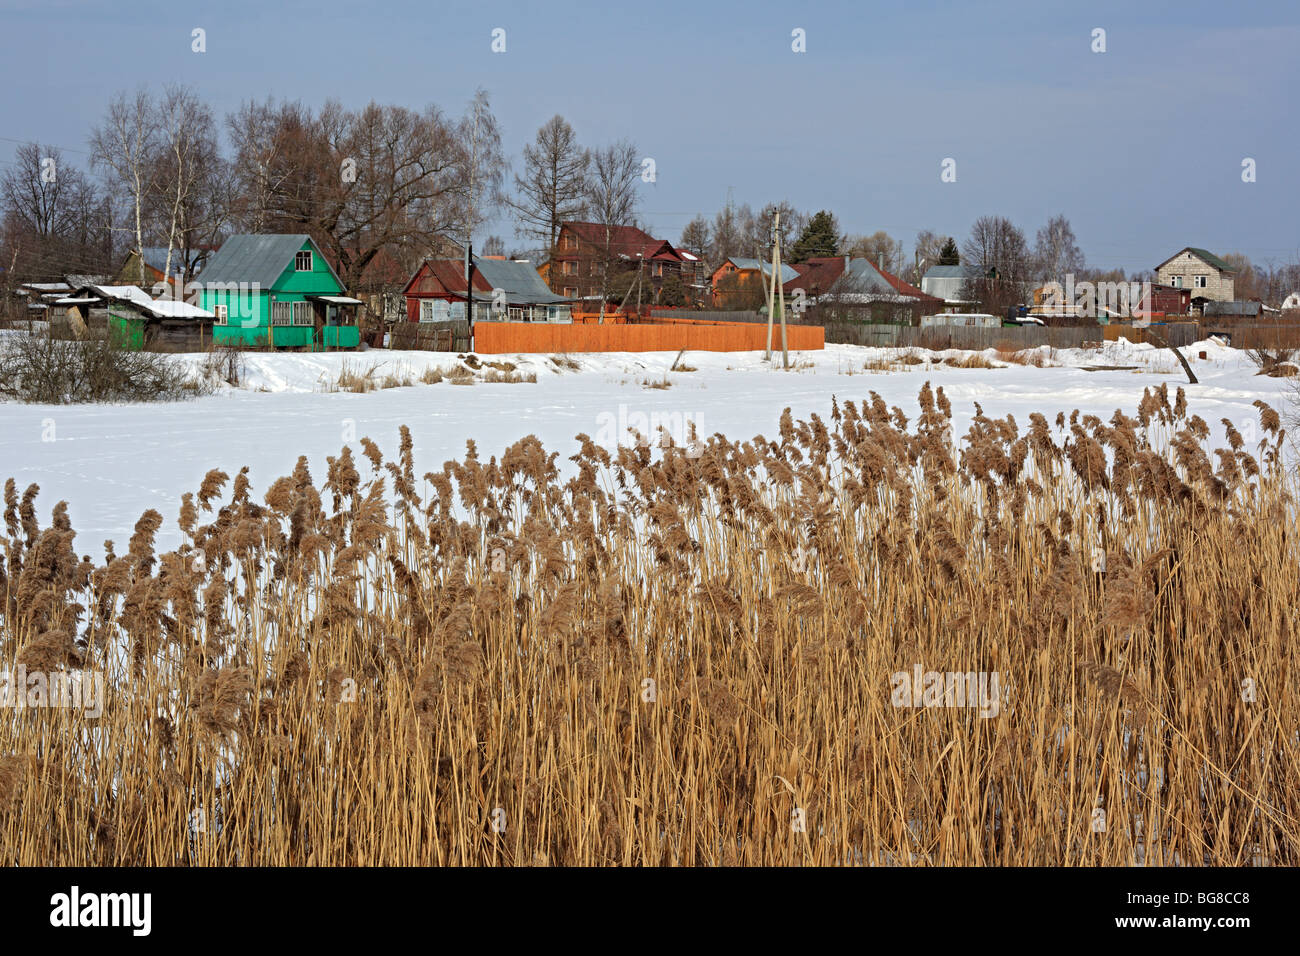 Rural cottages at winter, Russia Stock Photo